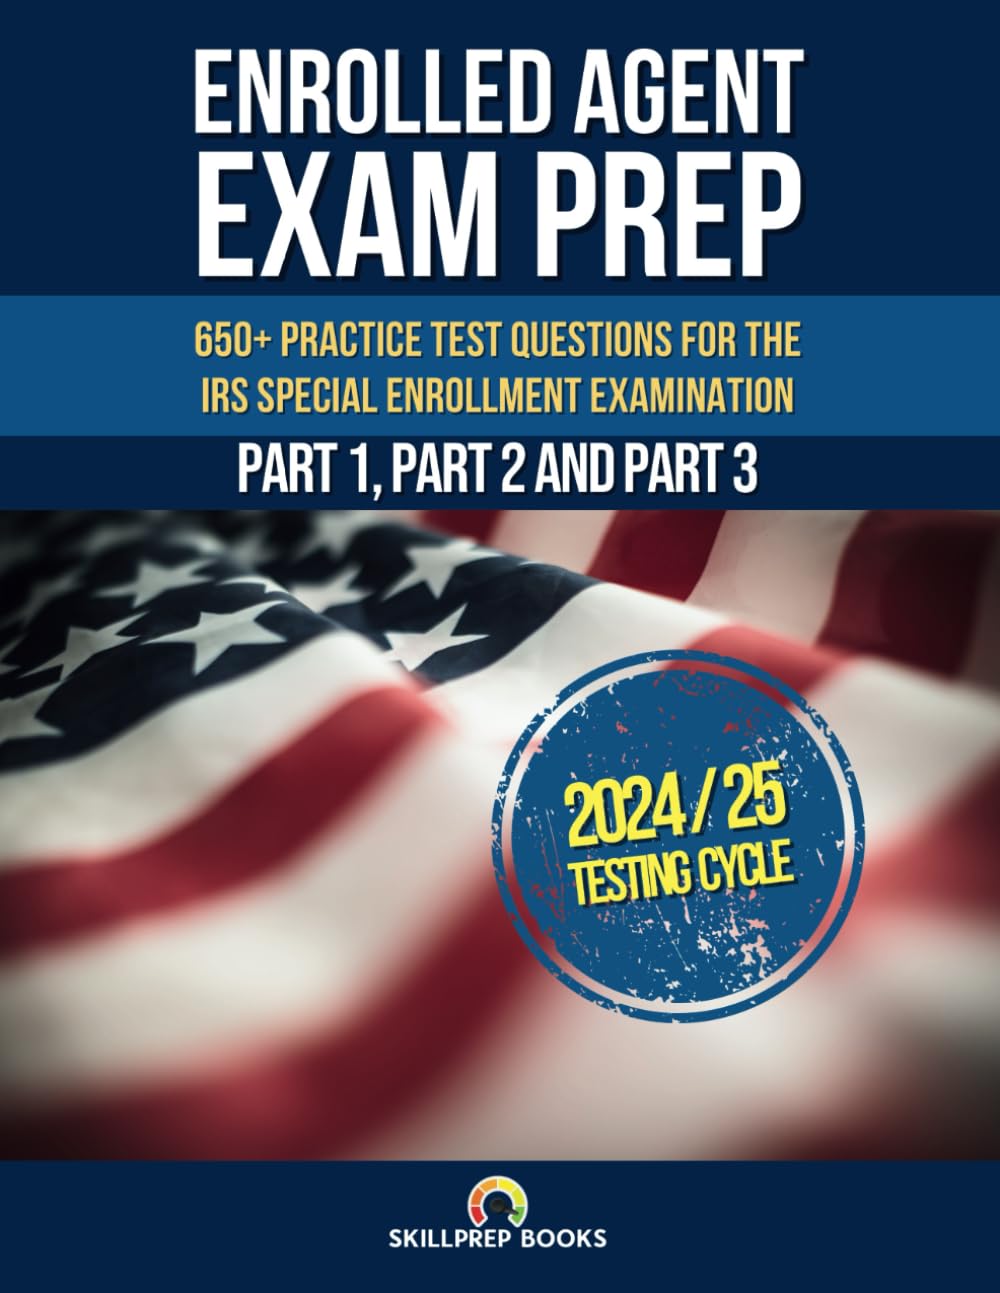 Enrolled Agent Exam Prep: 650+ Practice Test Questions for the IRS Special Enrollment Examination Part 1, Part 2 and Part 3